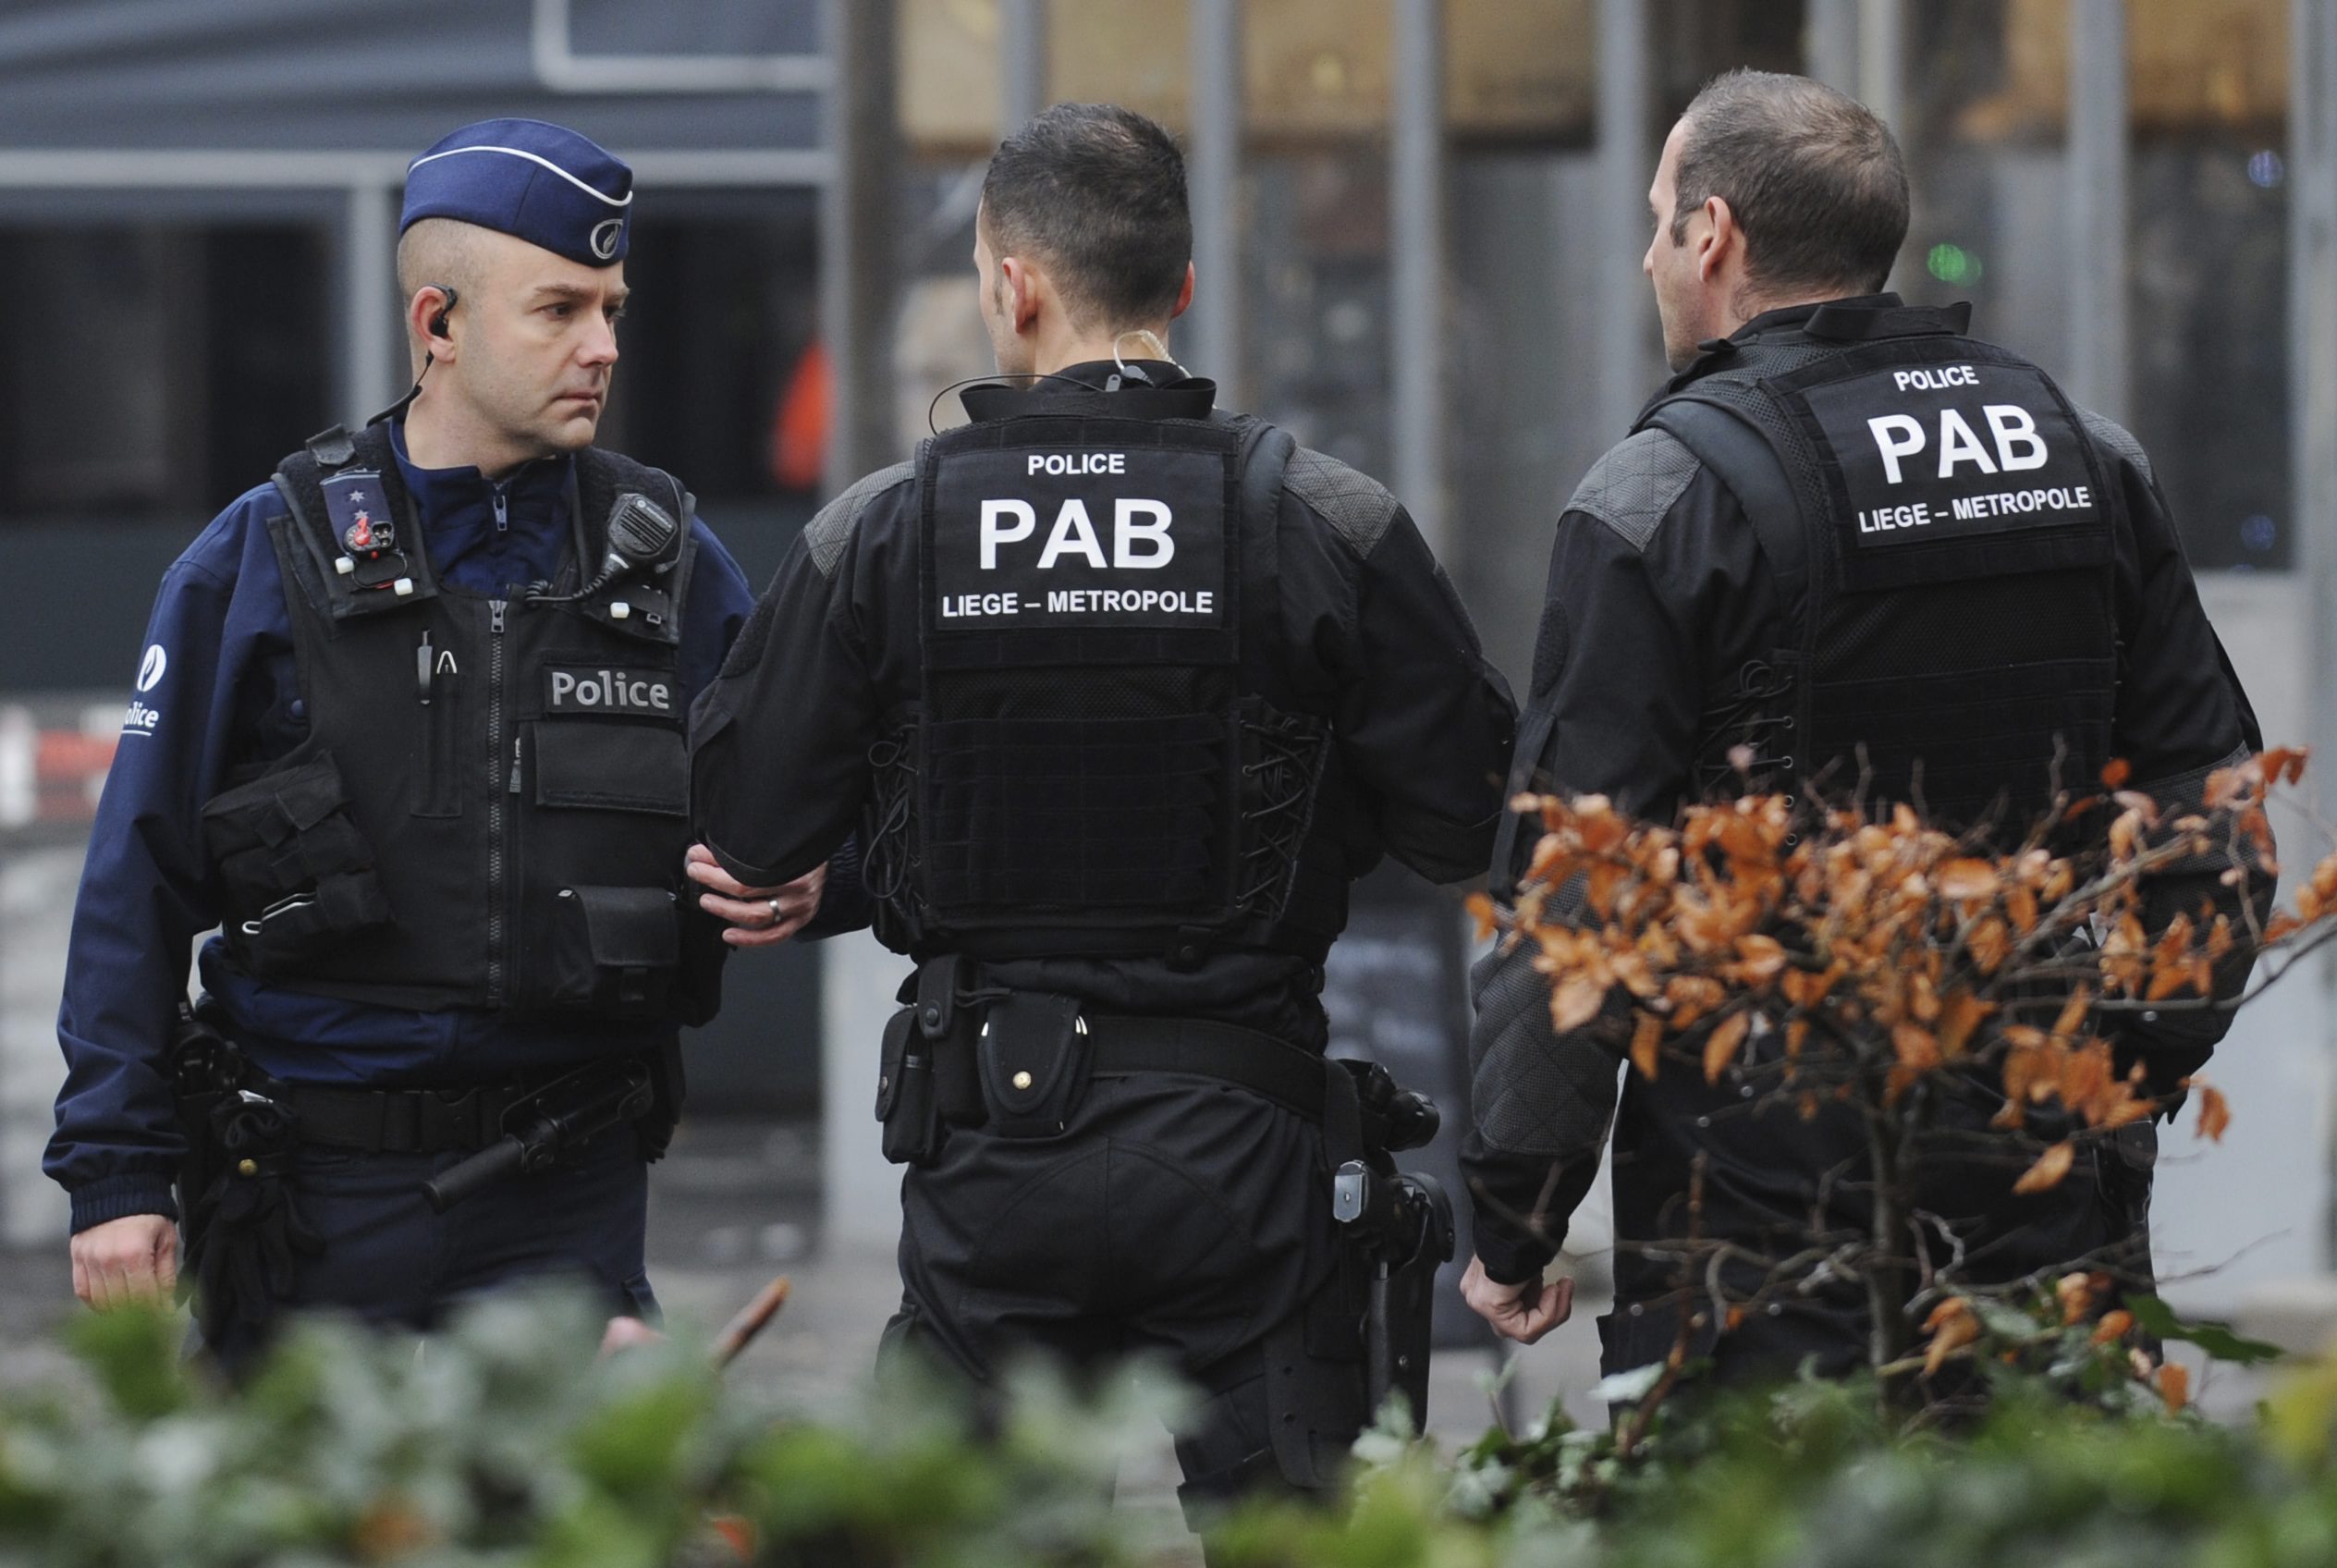 New raids were launched by the Belgian police across Brussels